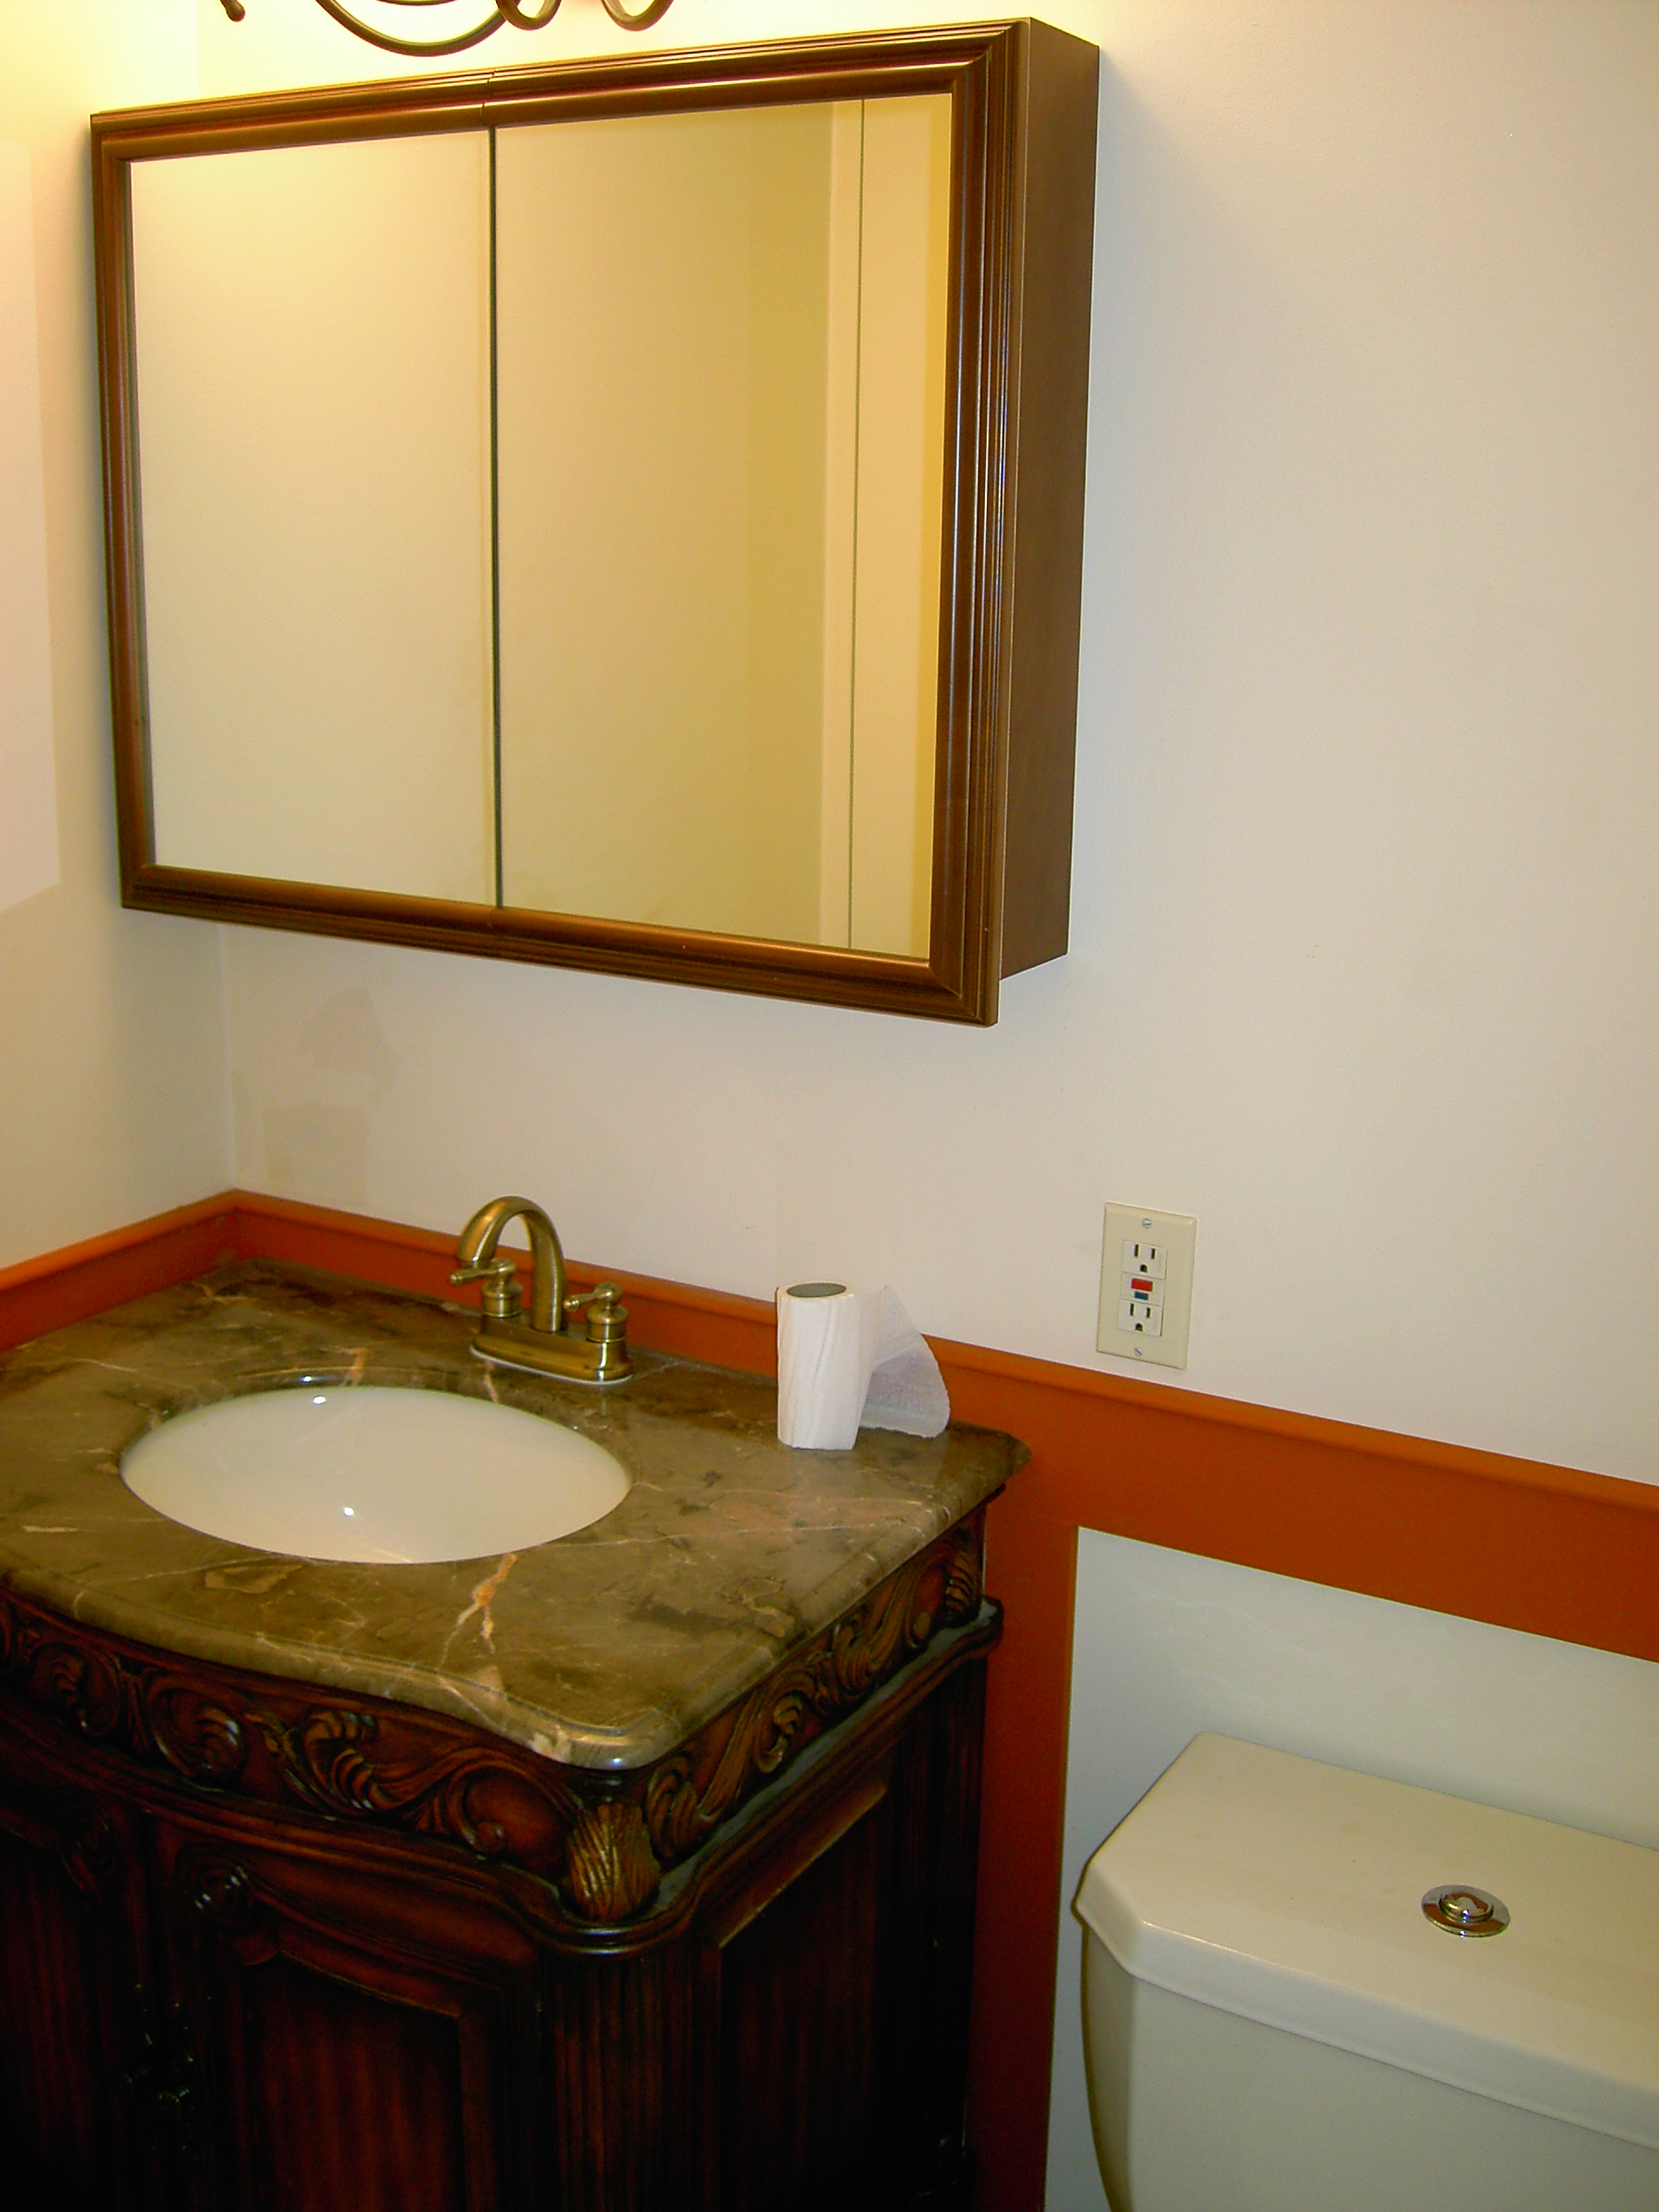 Custom Bathroom Vanities Medicine Cabinets And Chests Furniture Made